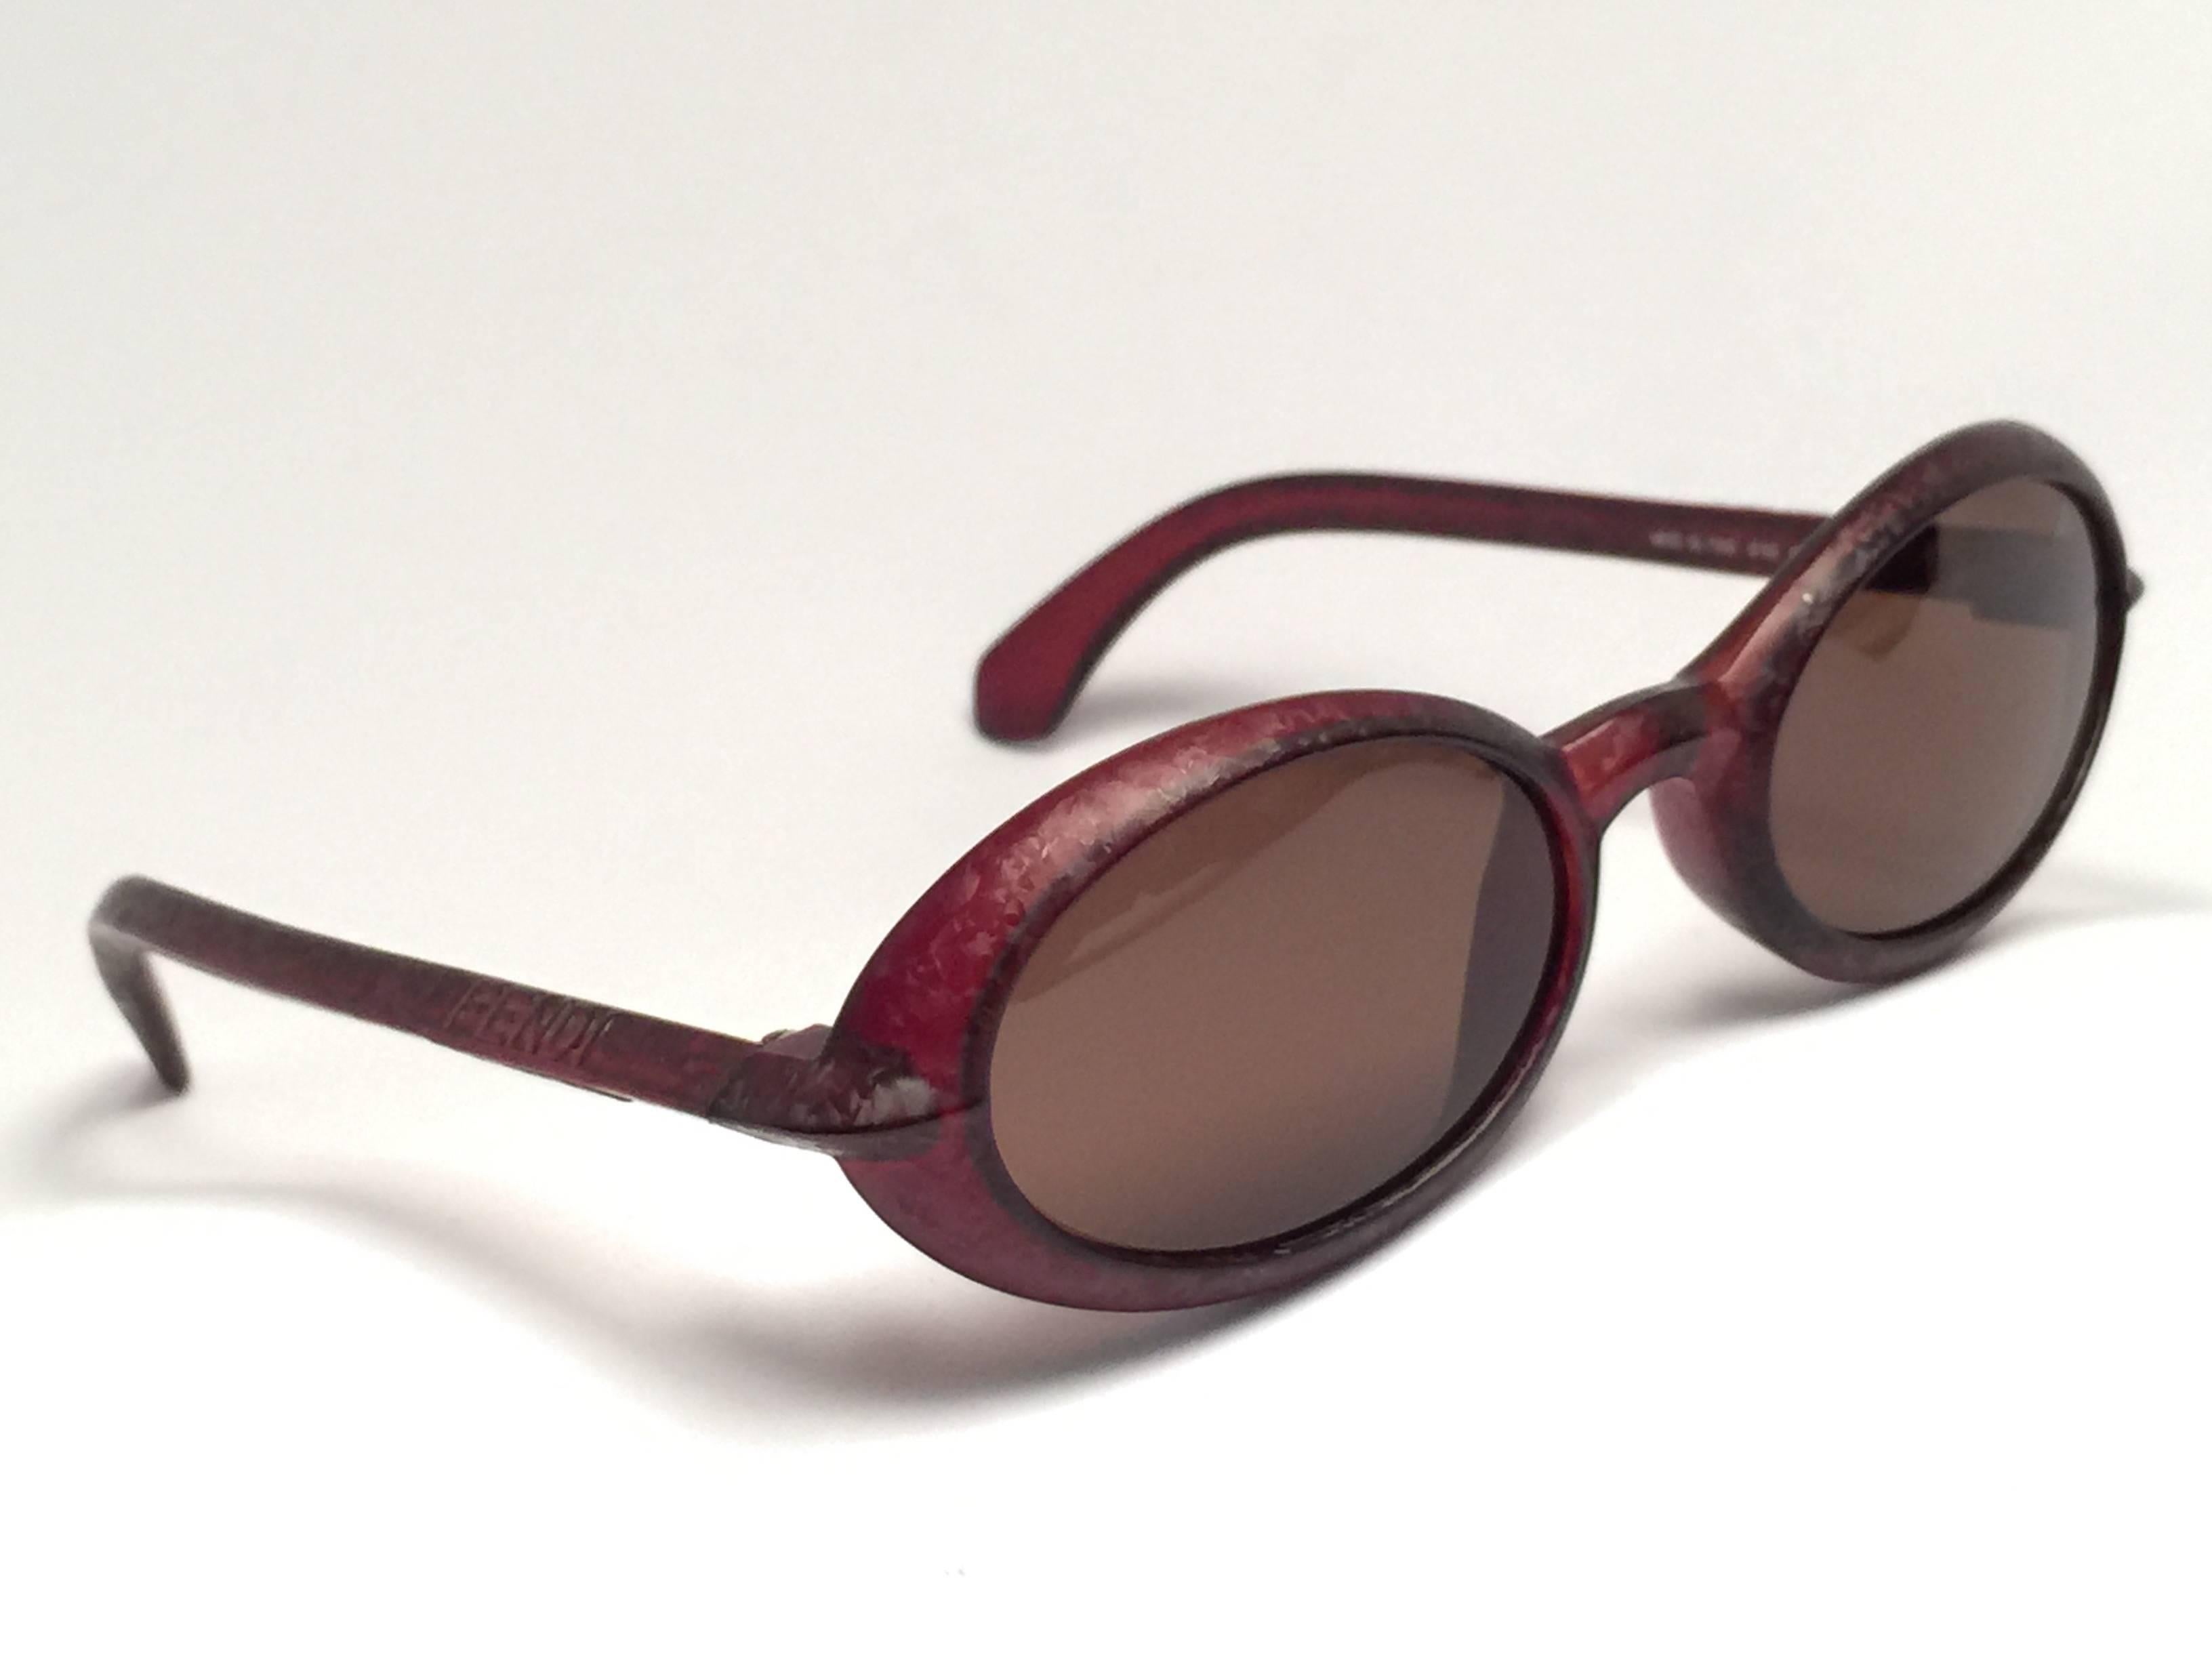 New Fendi textured oval dark red matte frame with brown ( UV protection ) lenses.

Made in Italy.
 
Produced and design in 1990's.

New, never worn or displayed.